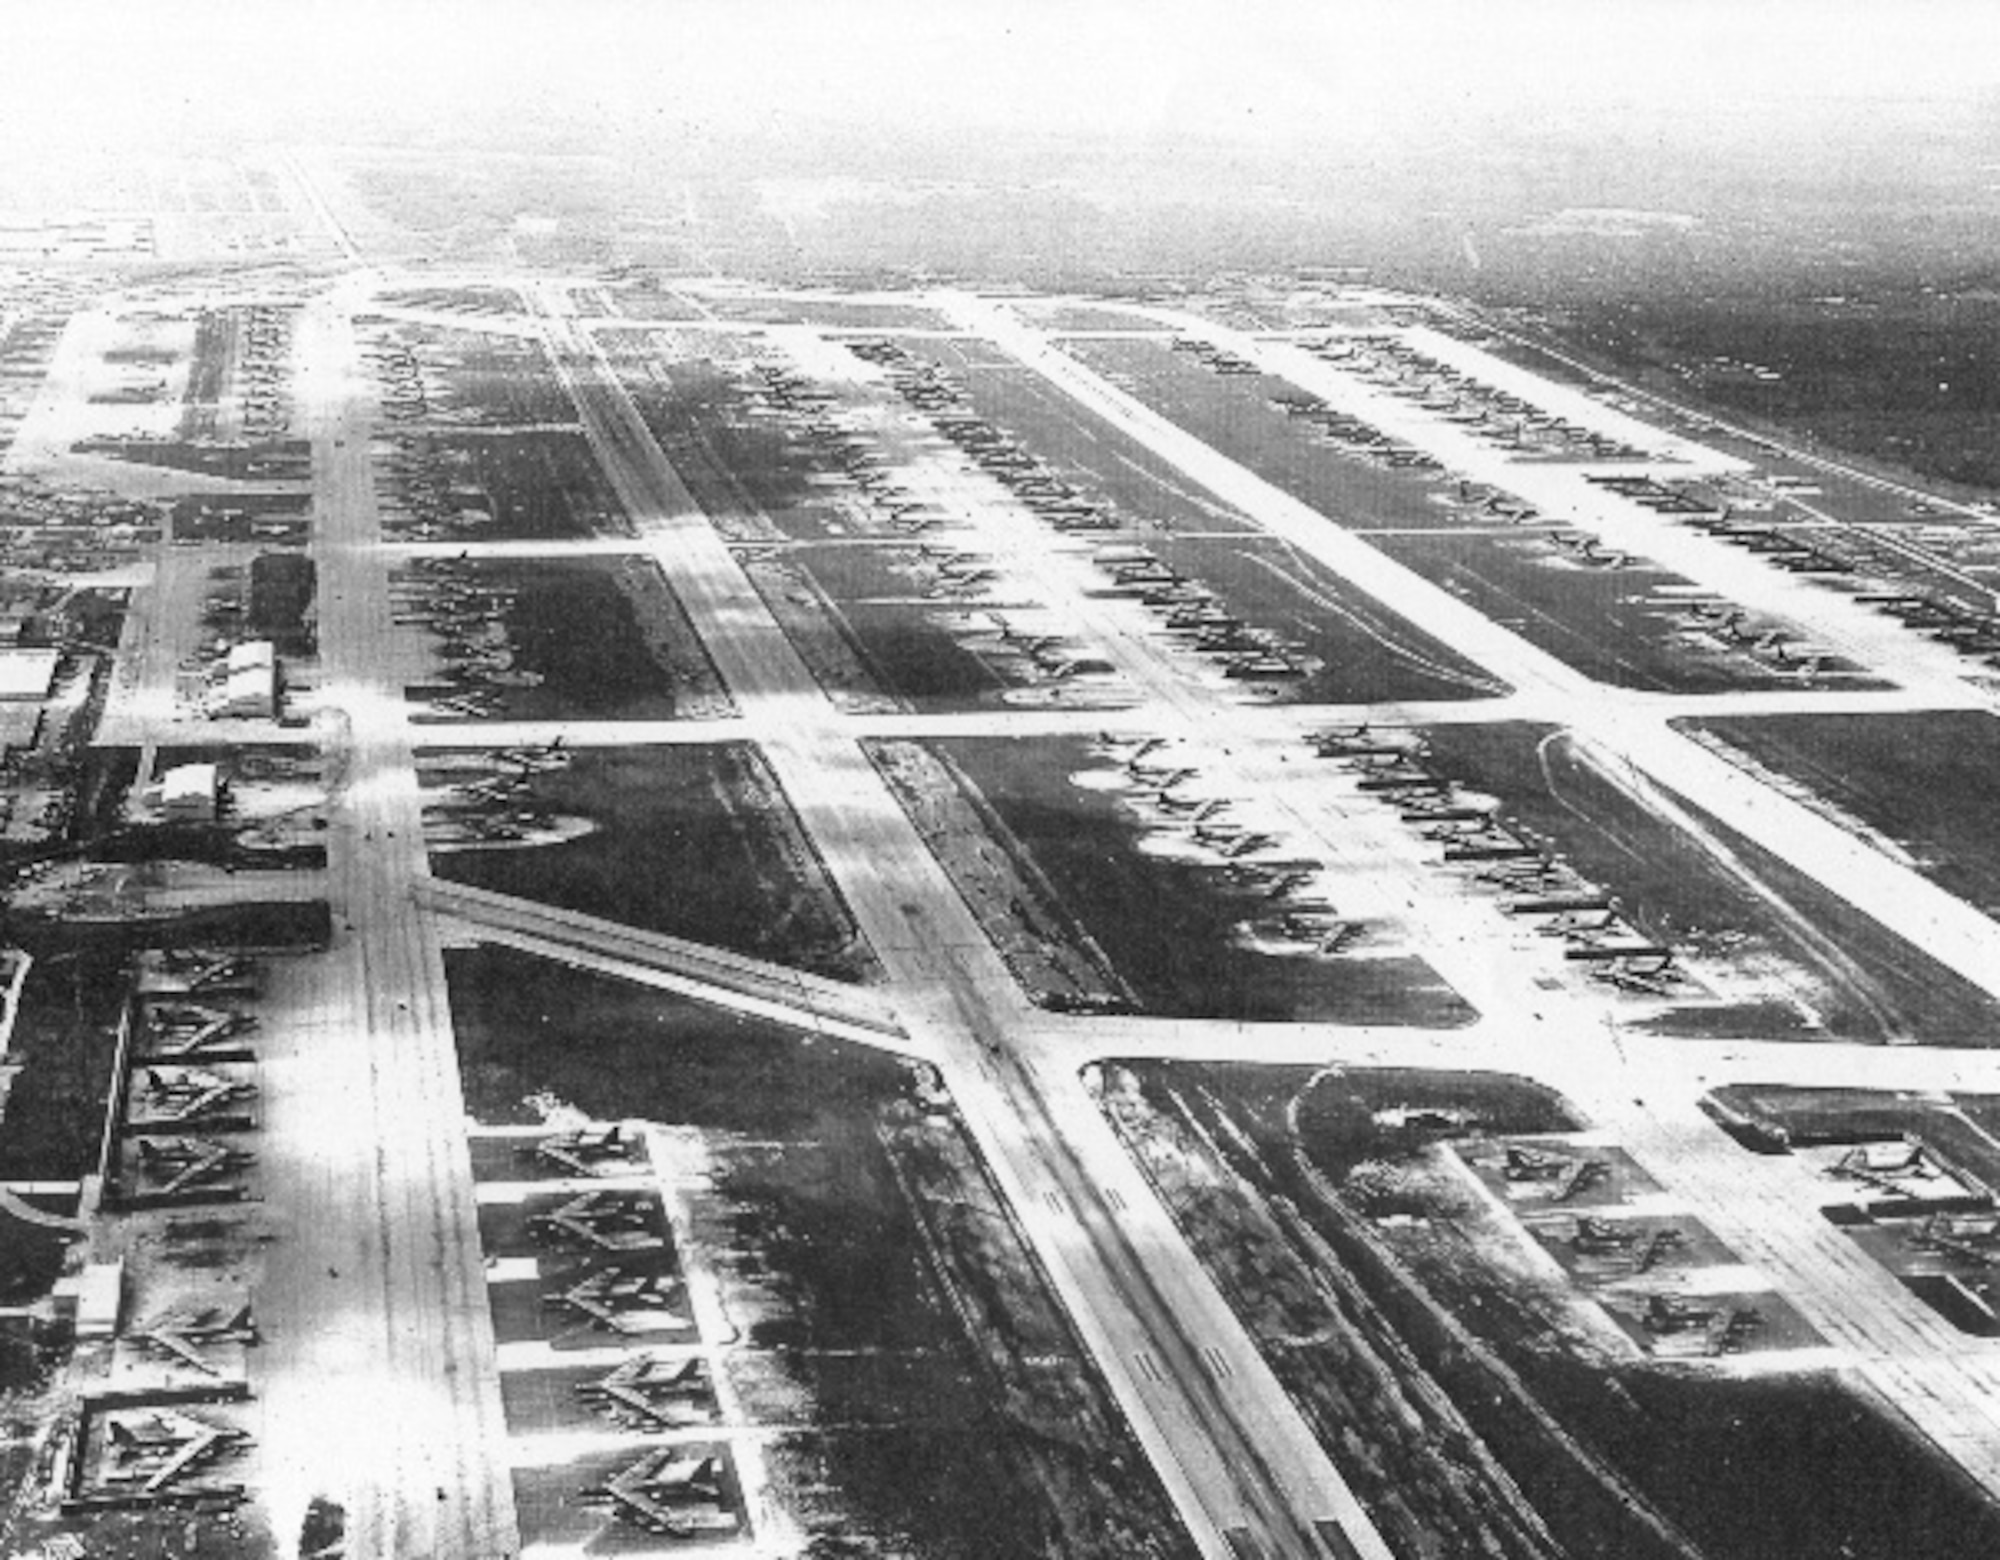 It took over 5 miles of ramp space to accommodate over 150 B-52s that were deployed to Andersen in the summer and fall of 1972, the prelude to Linebacker II. (Courtesy photo)